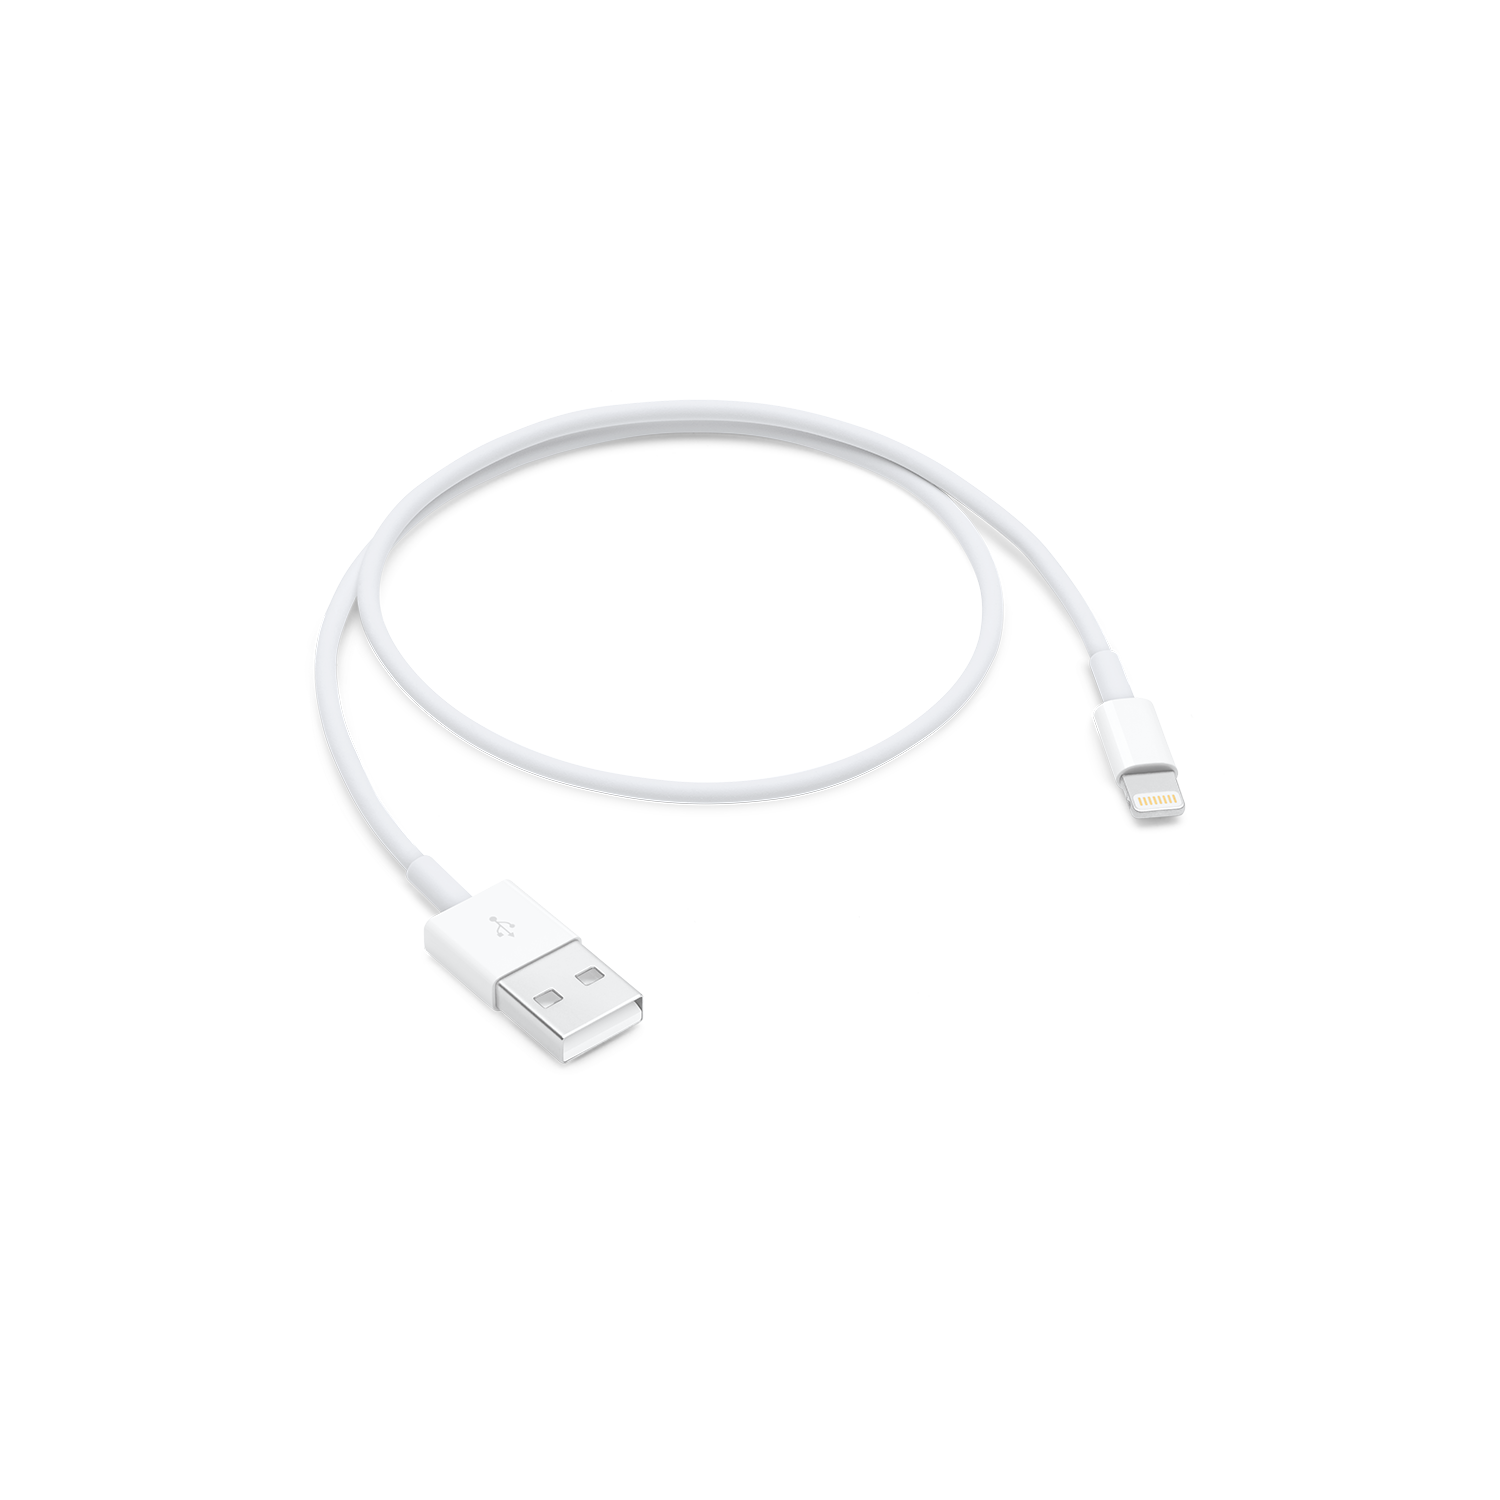  - Cable Lightning a USB Apple (1 m) 1